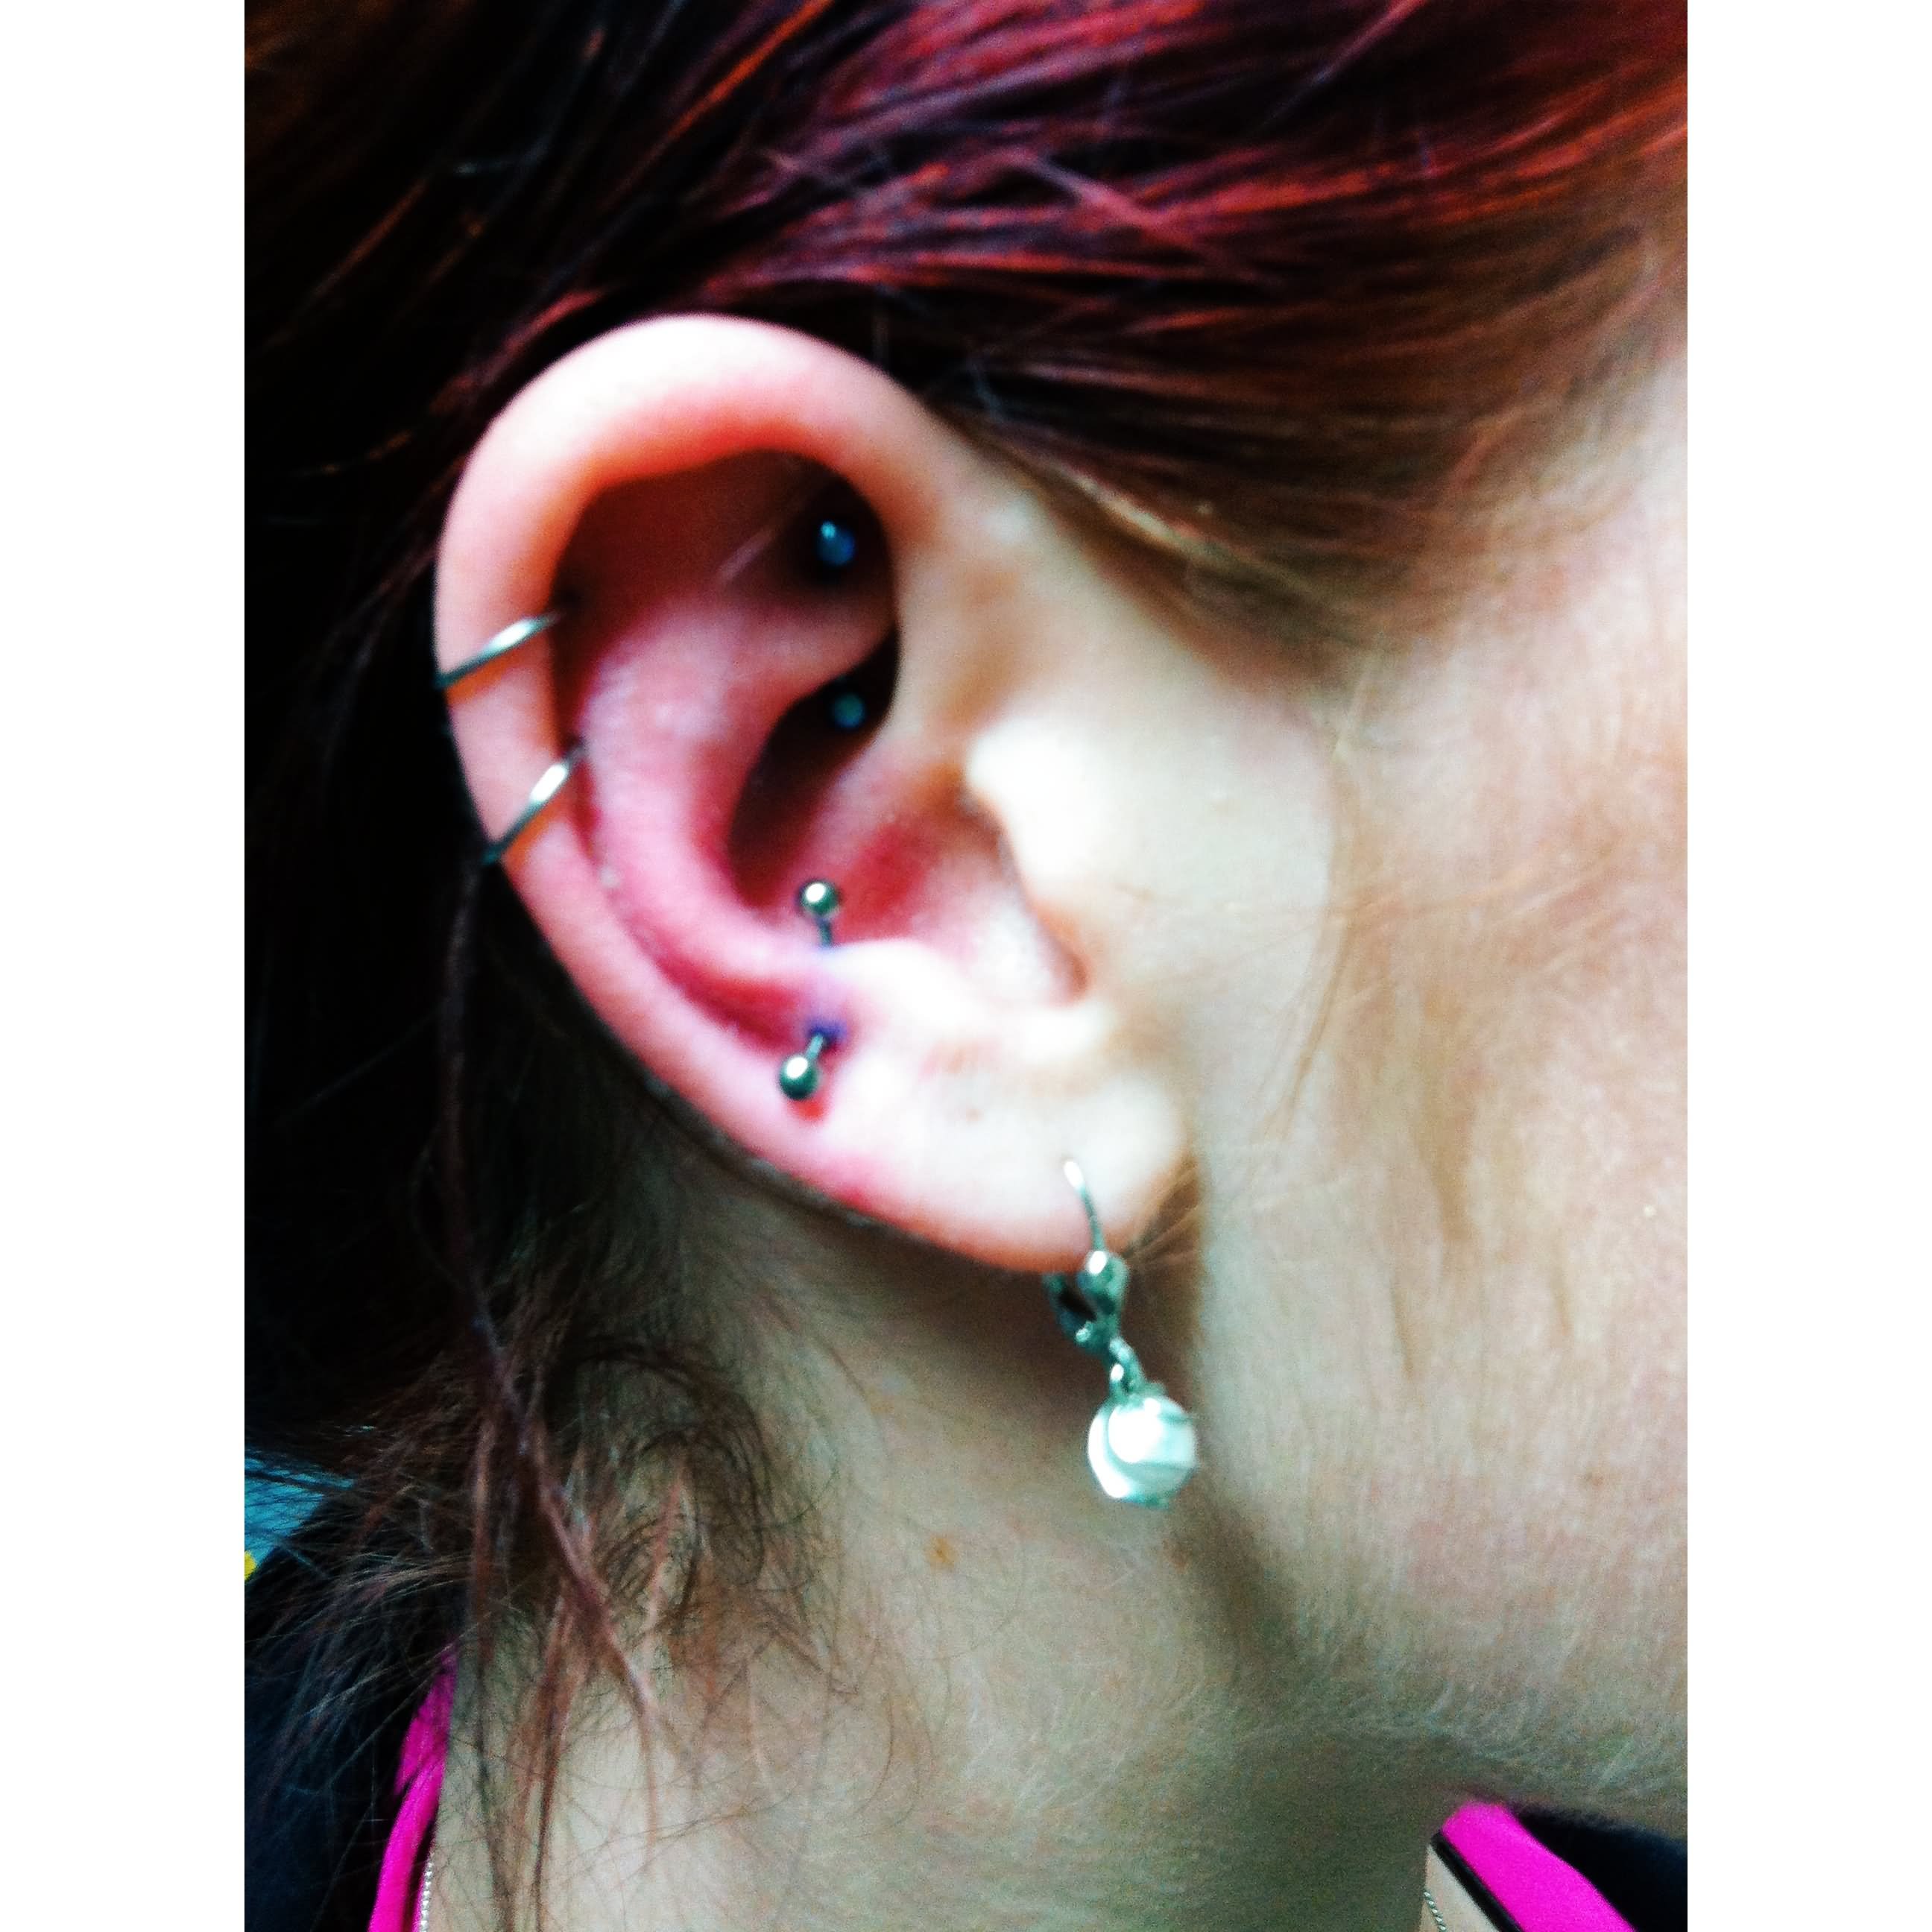 Girl With Spiral Helix And Snug Piercing With Curved Barbell